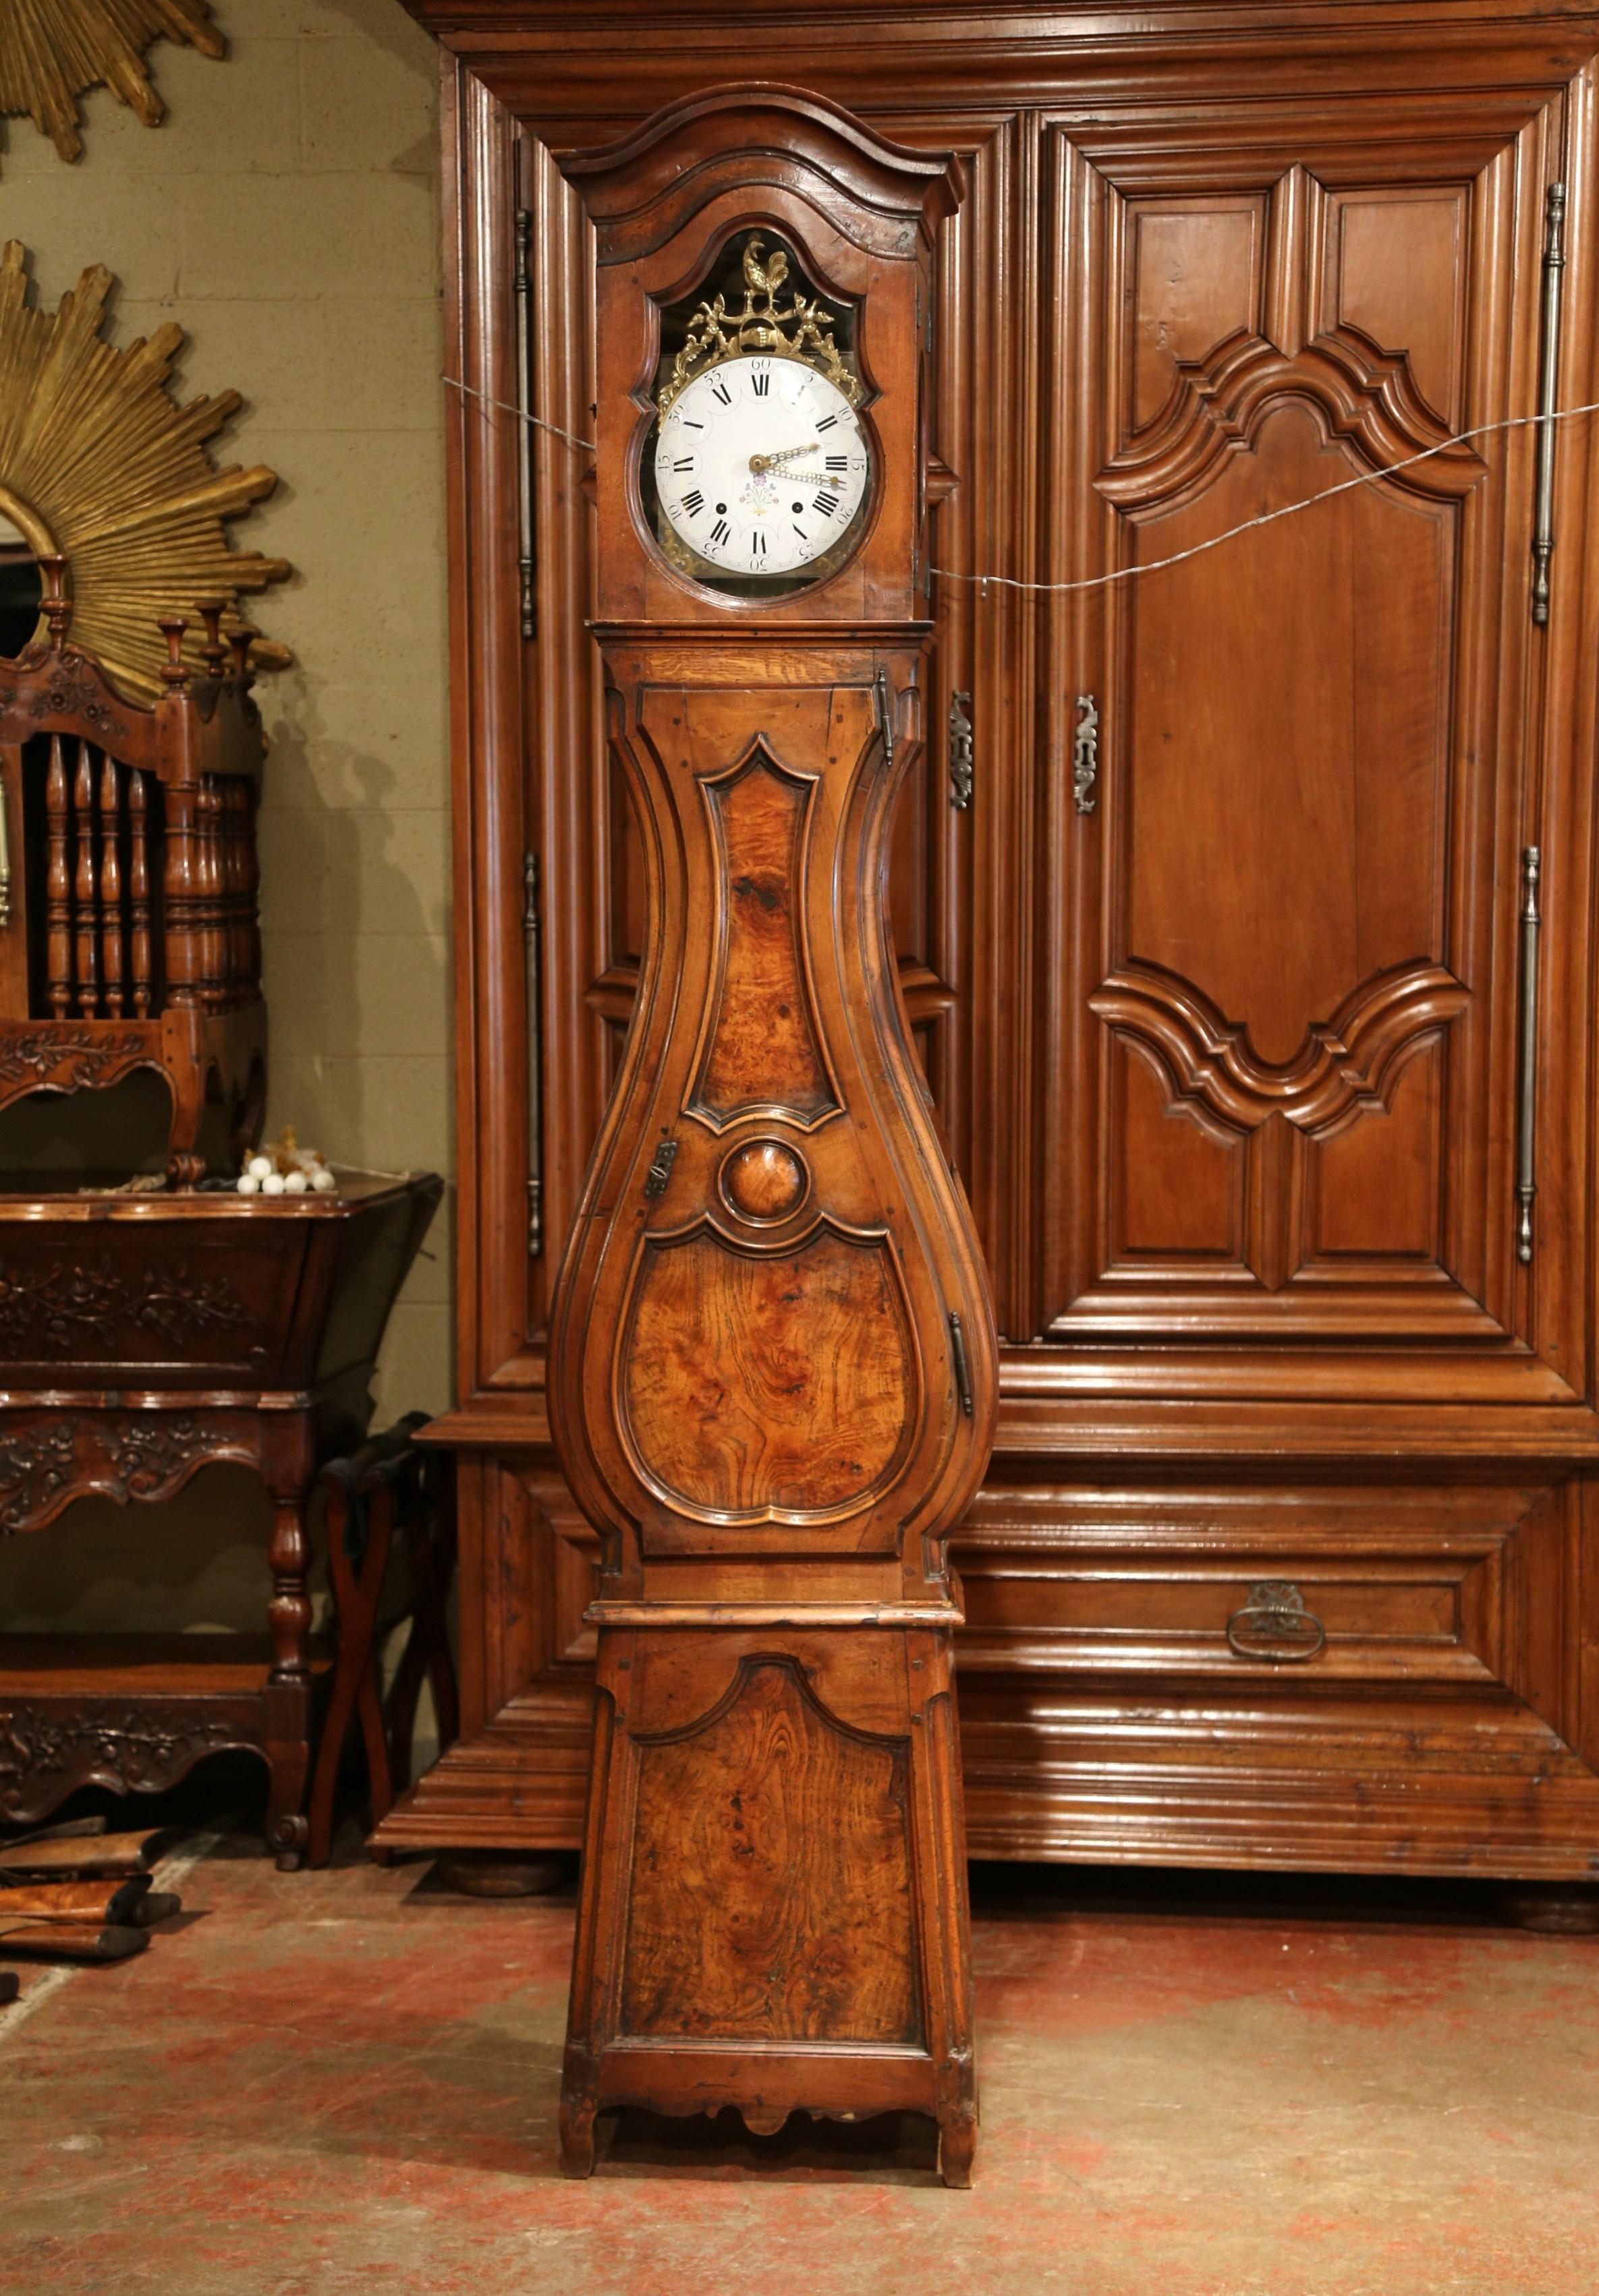 This elegant, antique grand father clock was crafted in Lyon, France, circa 1780. The fruitwood tall case clock has beautiful carved lines with a bonnet top, a violin shape body style and finished at the base with scroll feet under a scalloped